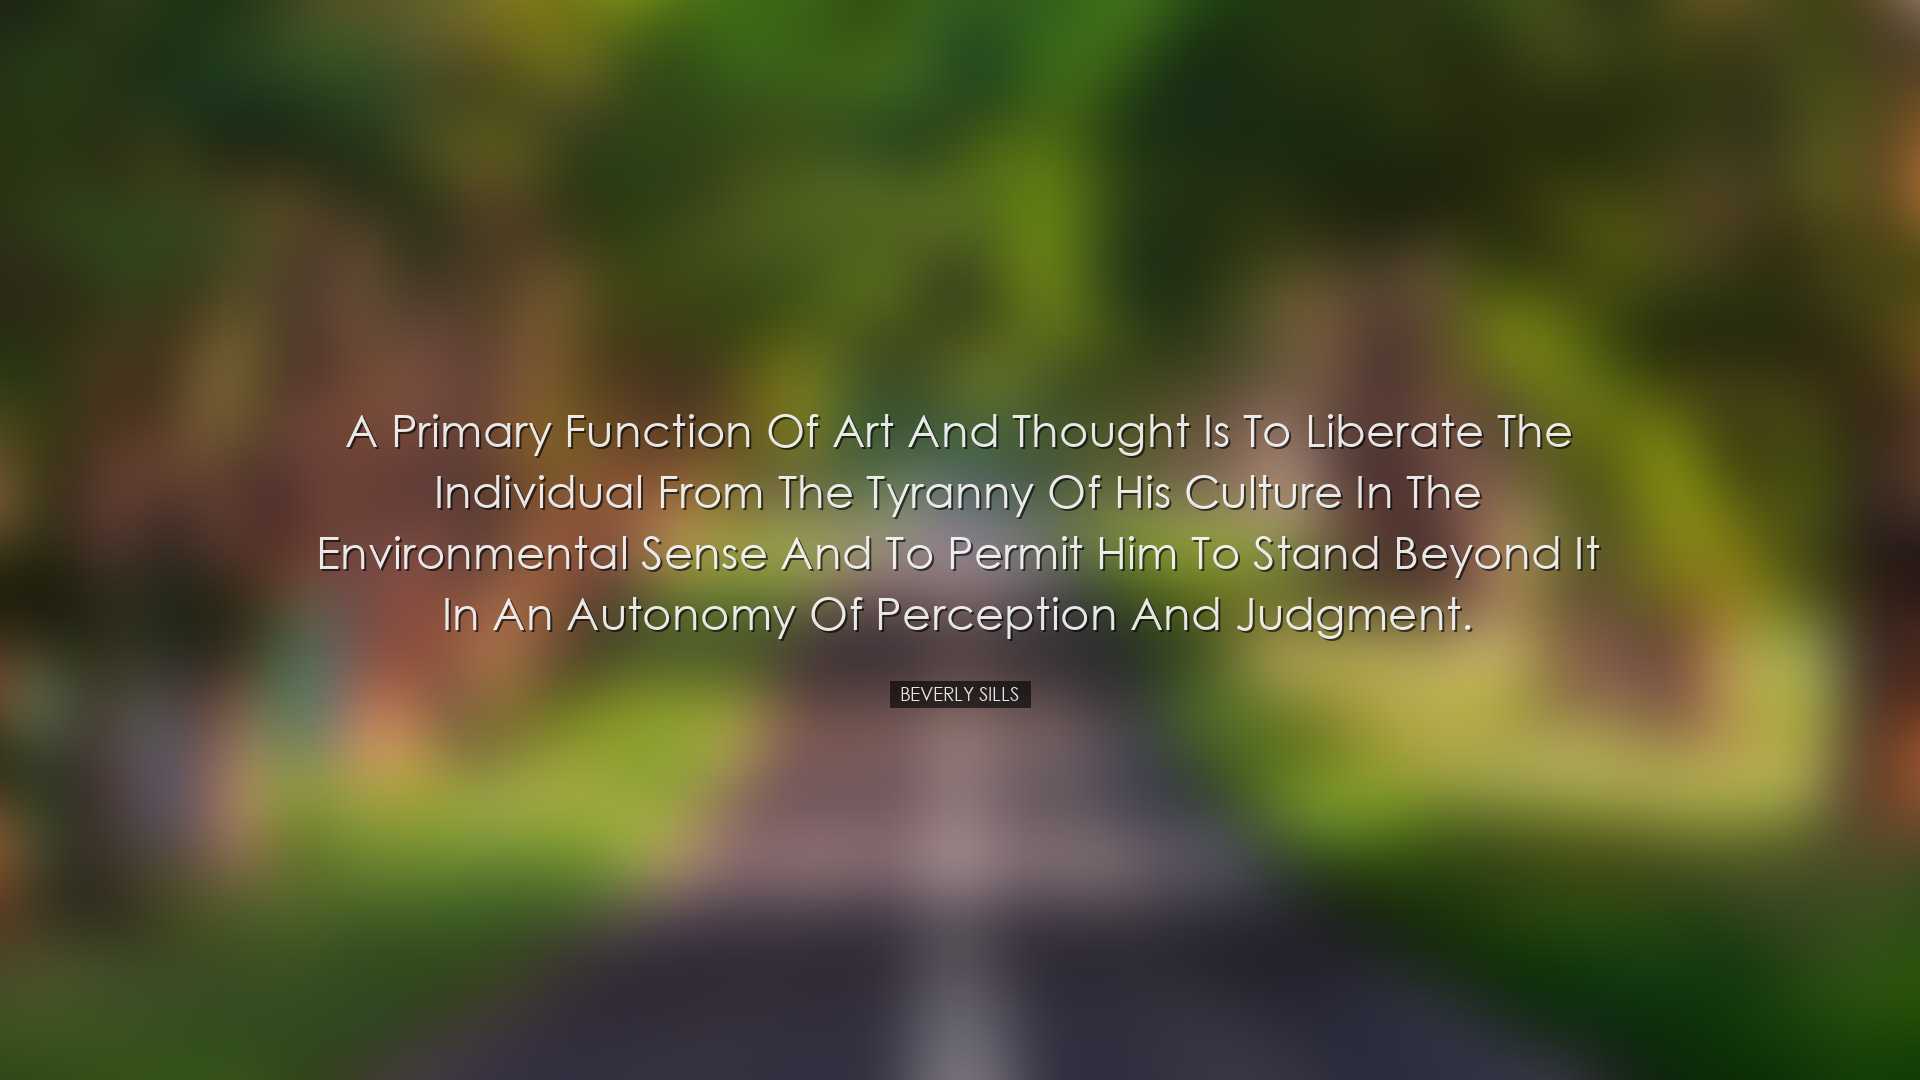 A primary function of art and thought is to liberate the individua